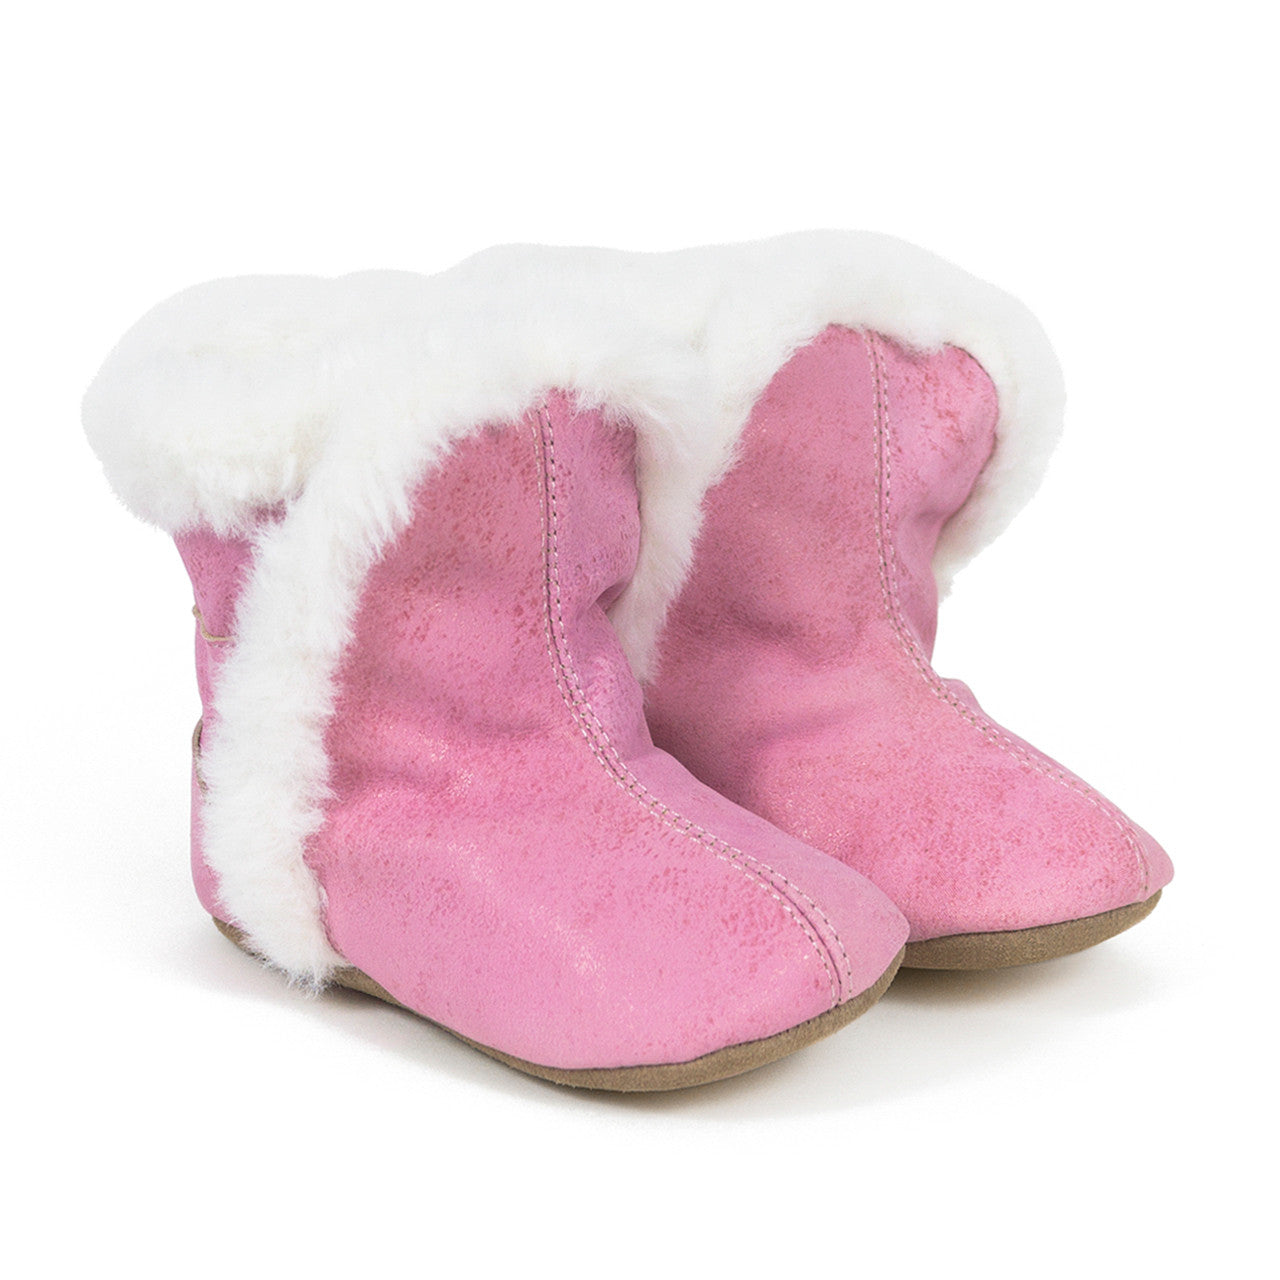 Girls Classic Boots - Pink Girls Shoes Robeez   